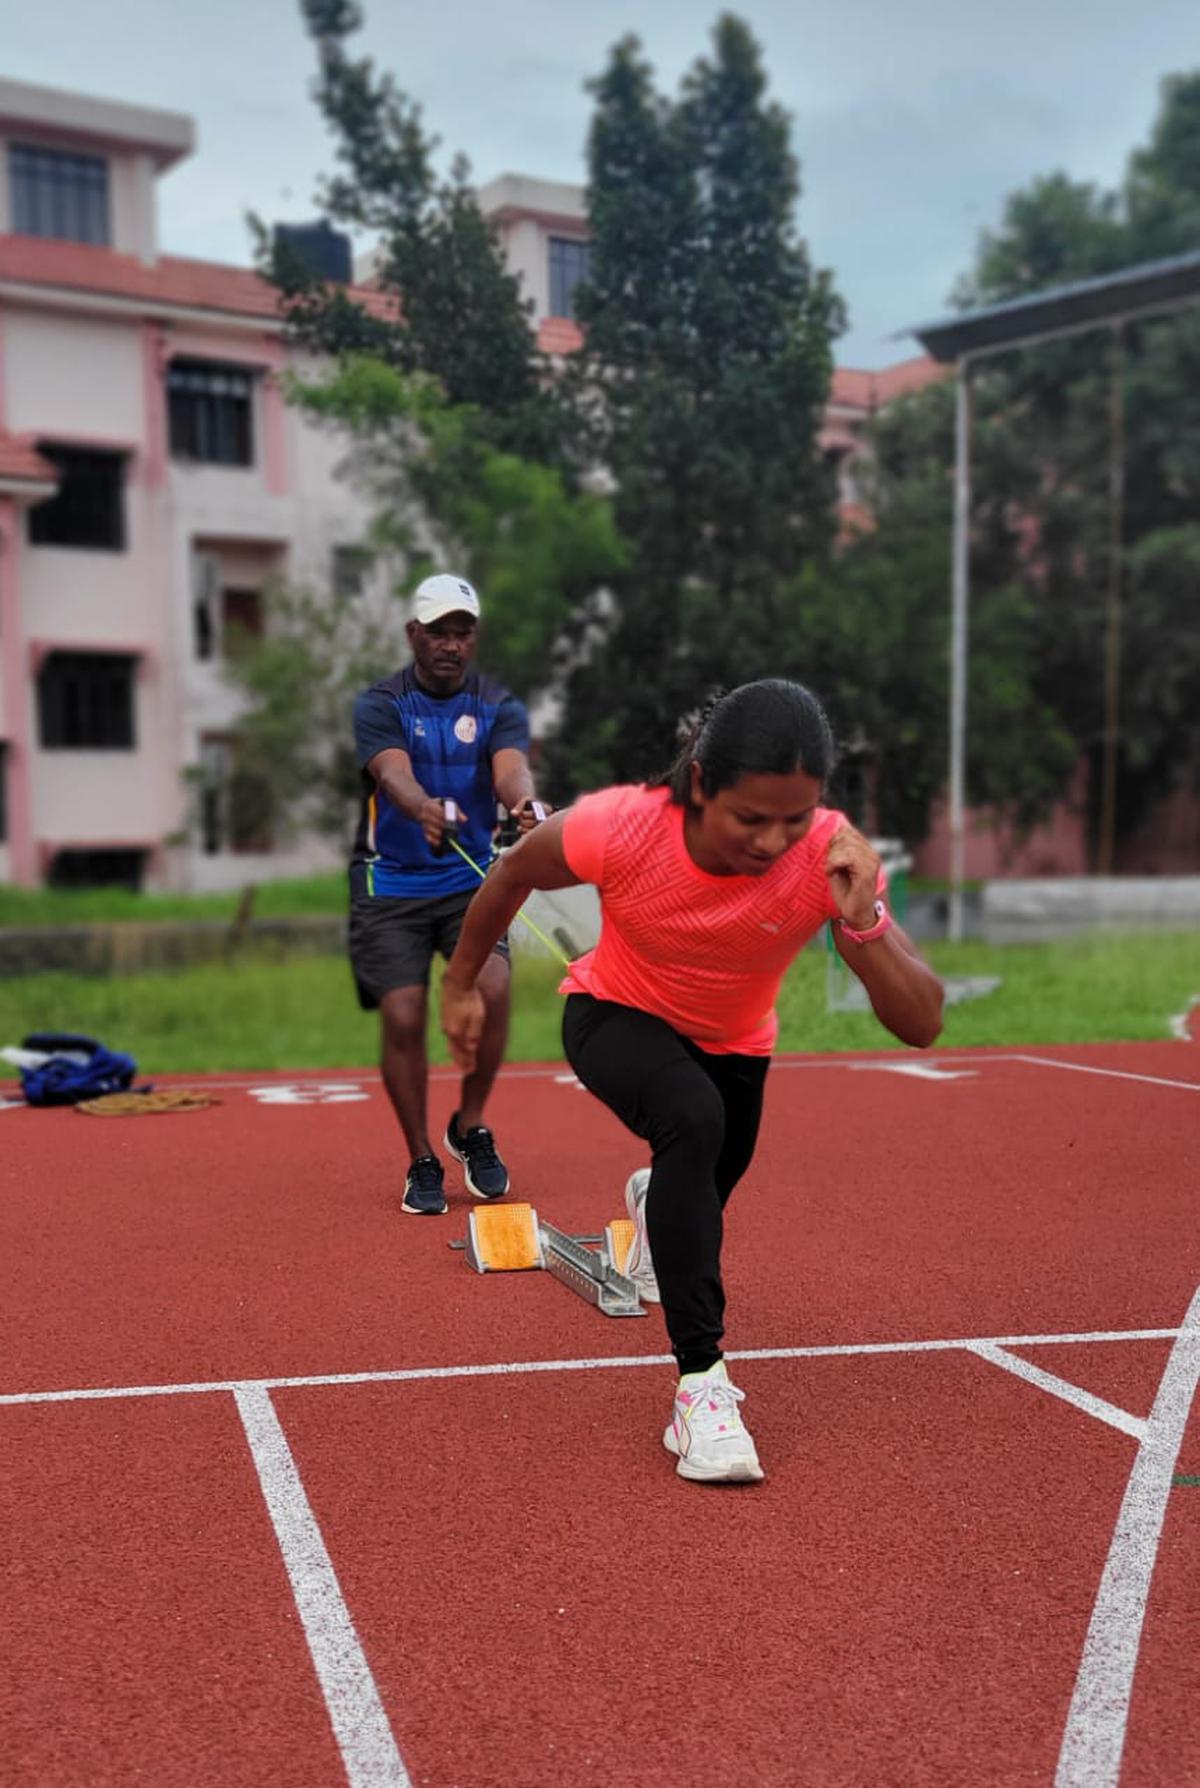 Dutee Chand has been trying to accelerate better from the starting blocks, even though block start has always been her strong point.